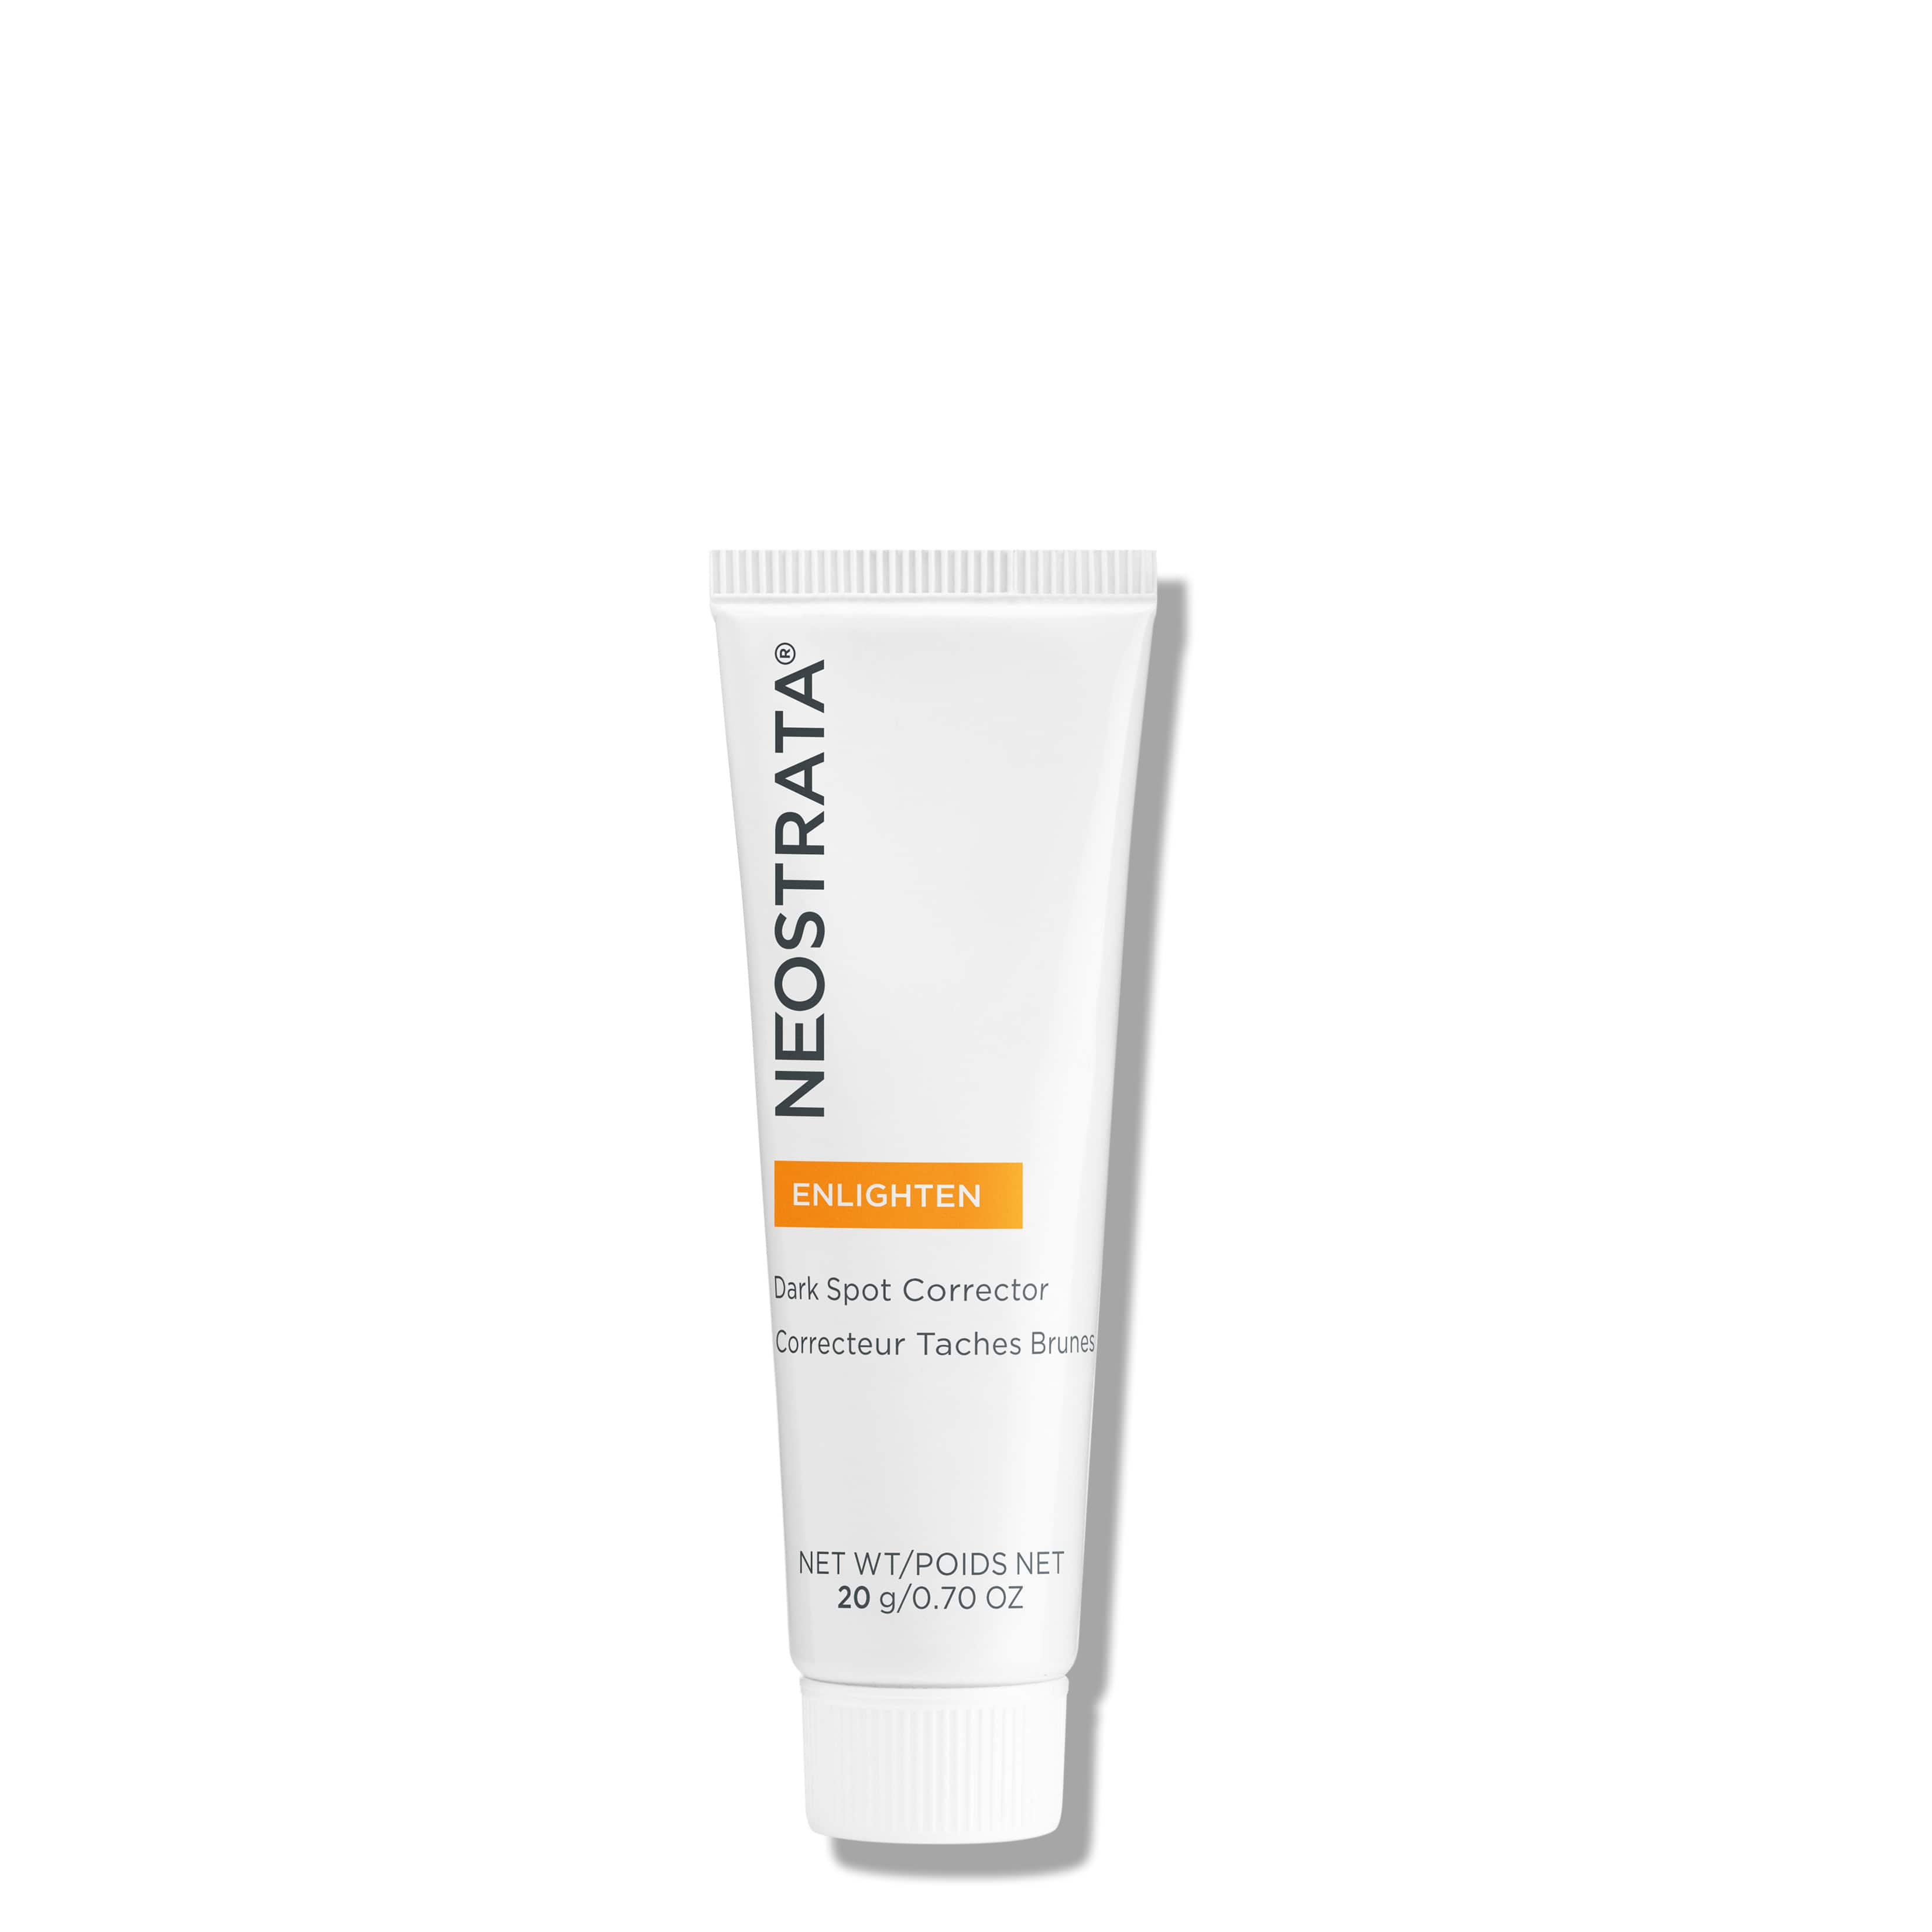 NeoStrata Dark Spot Corrector | Improves The Look Of Dark Skin Coloration Targeting A More Even Appearance | Anti-Aging